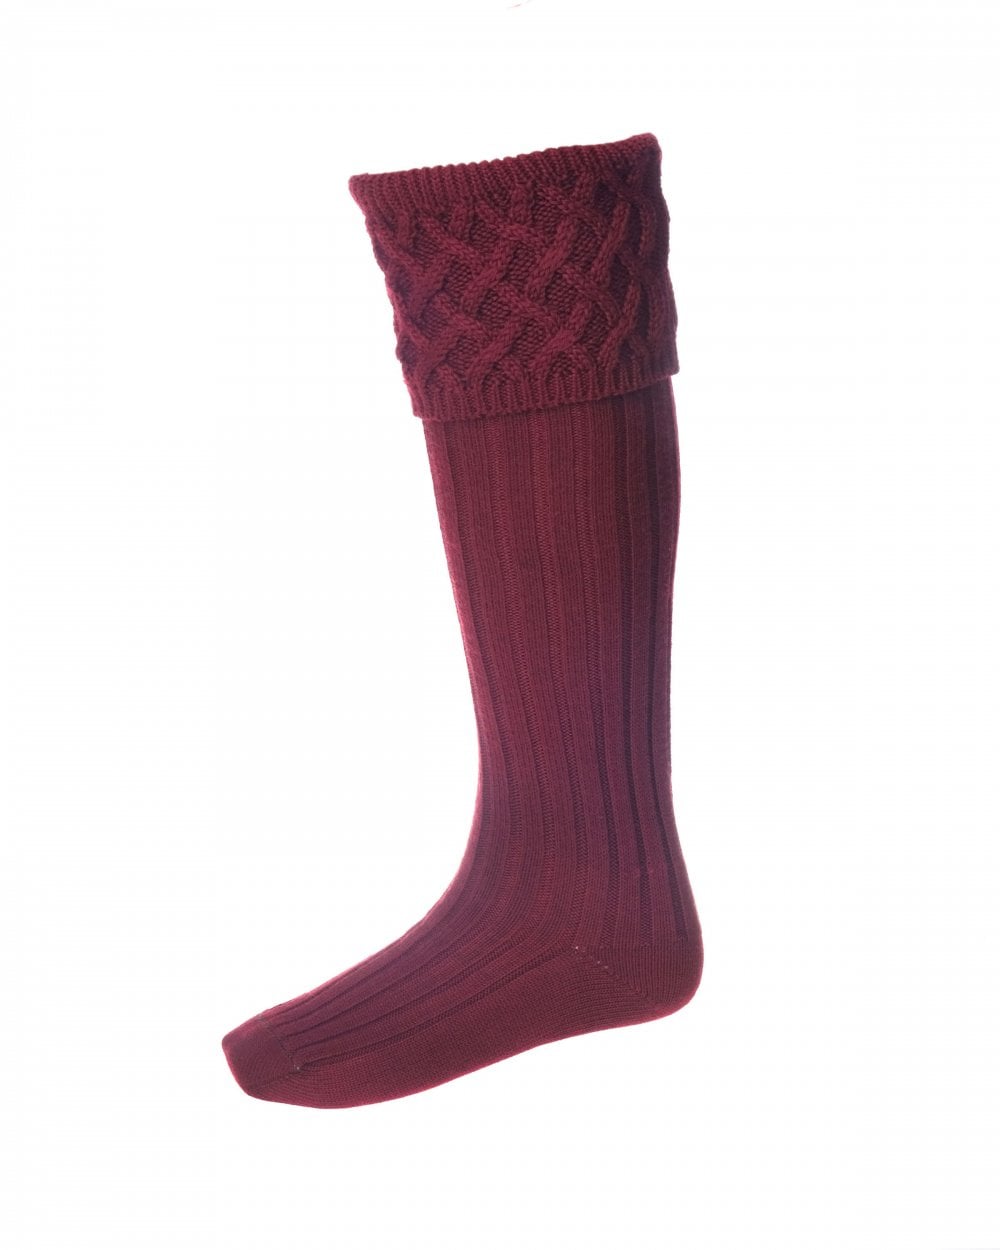 House Of Cheviot Rannoch Shooting Socks with Garters - Fin & Game